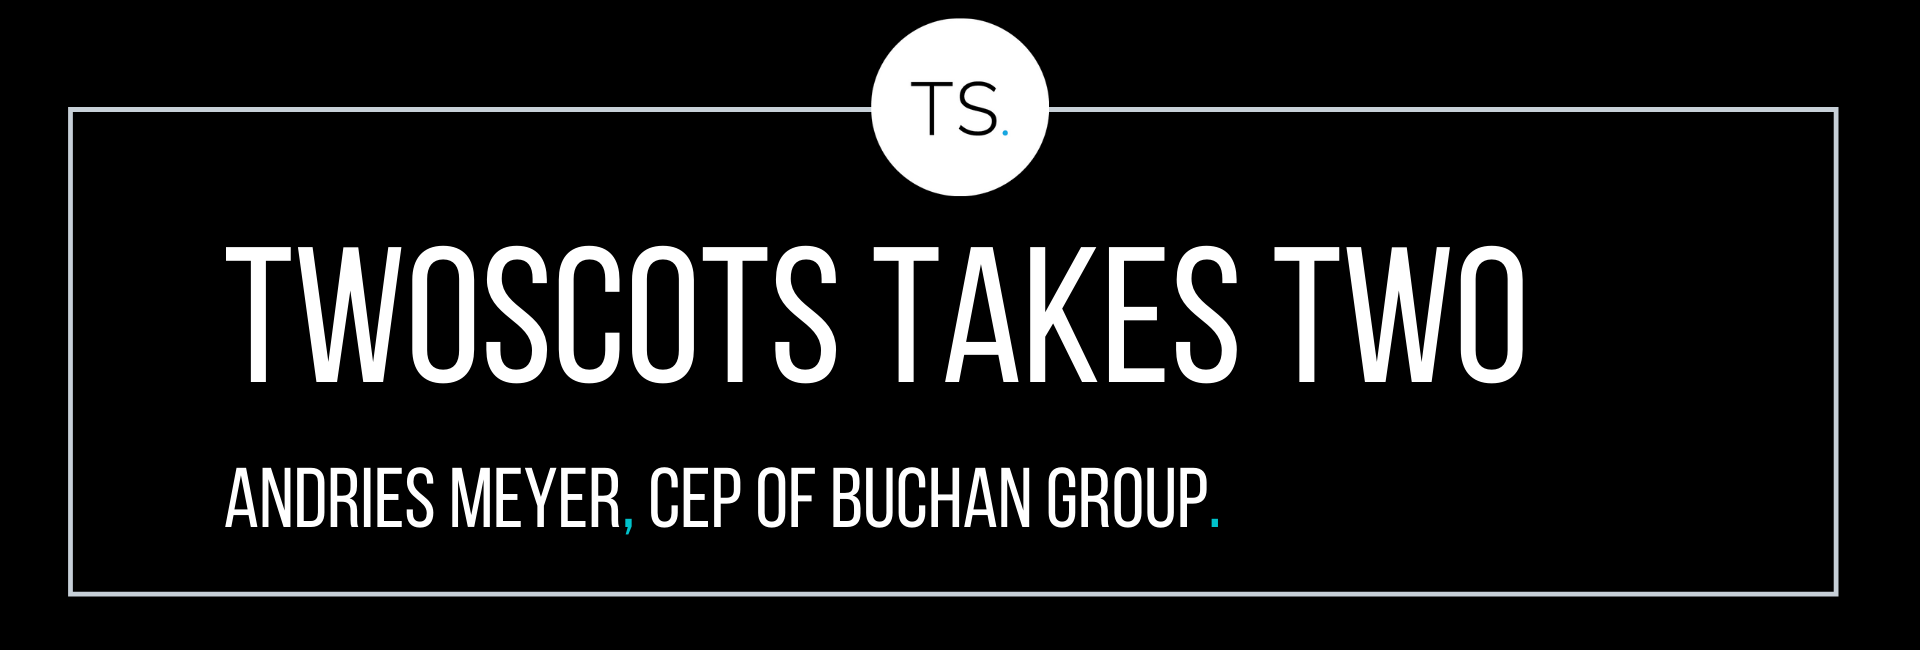 TwoScots Takes Two with Andries Meyer, CEP at Buchan Group